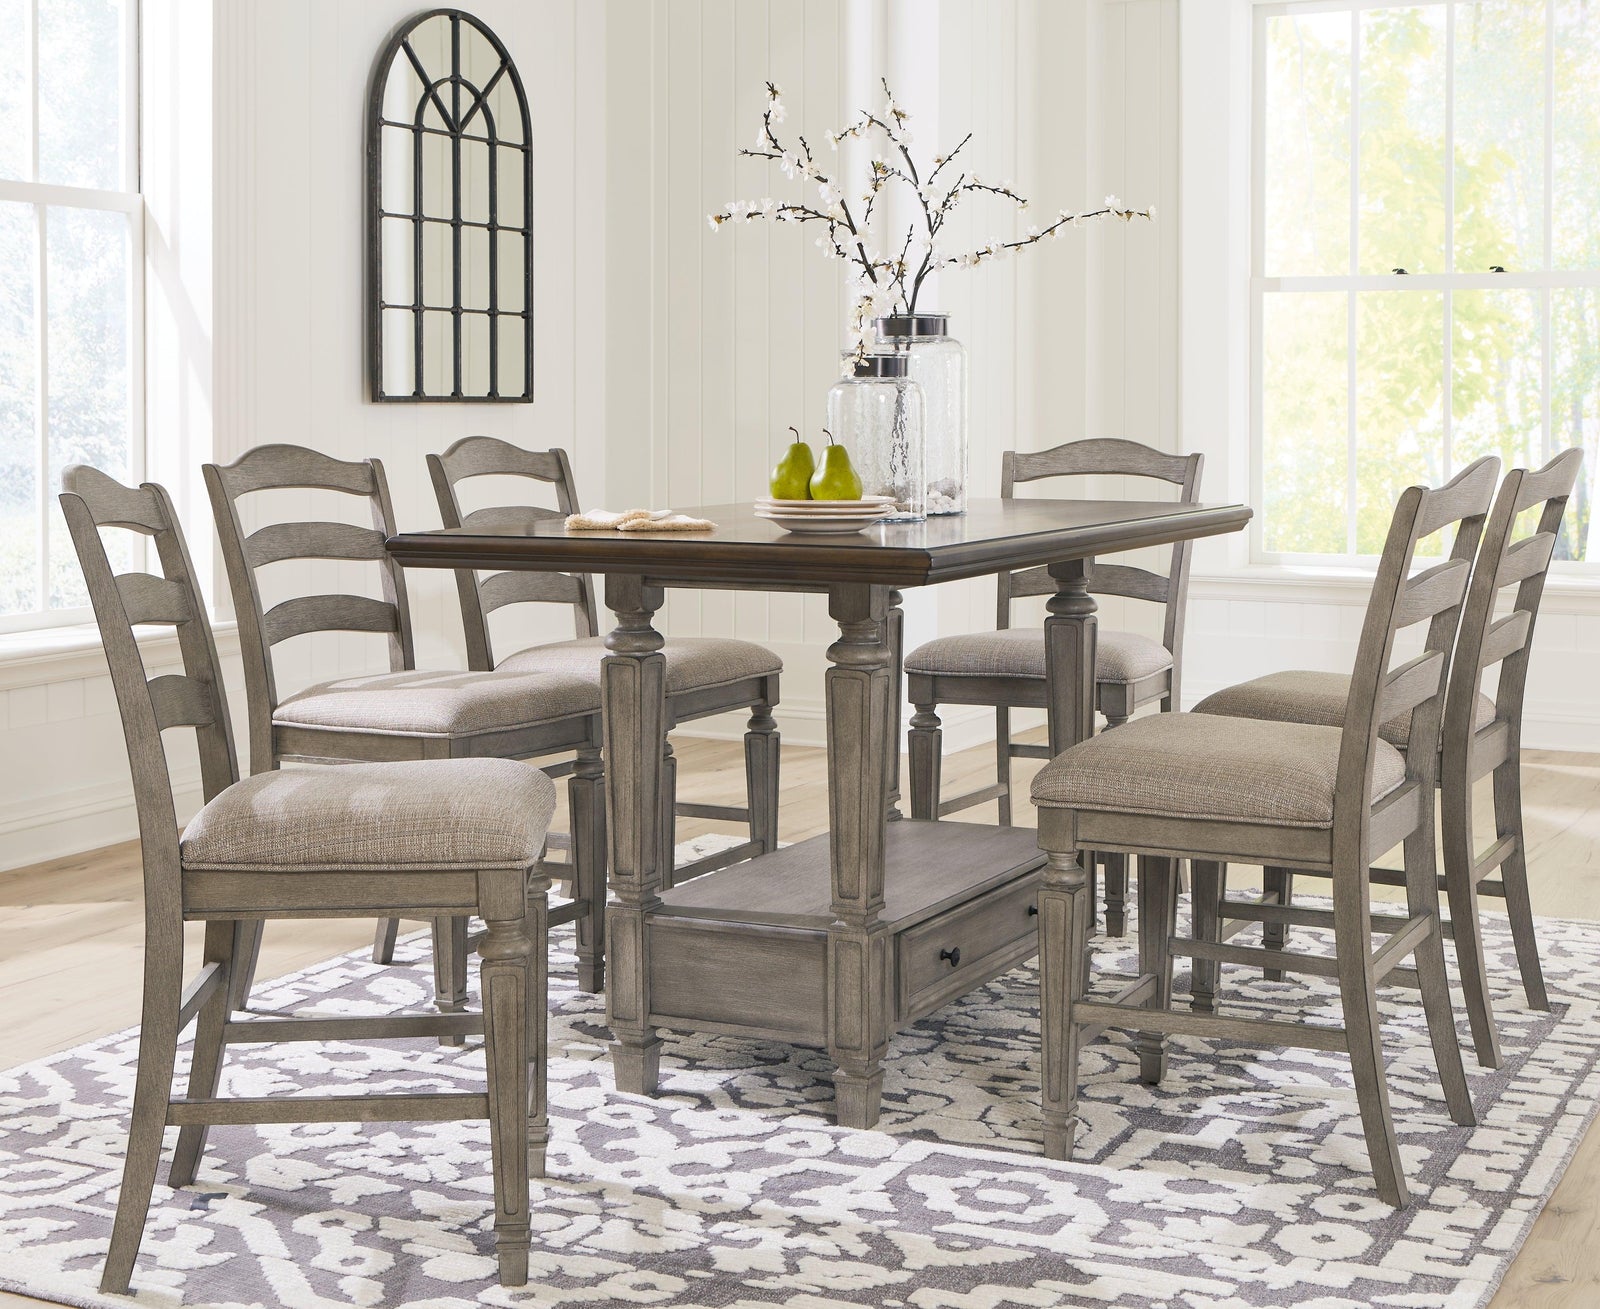 Lodenbay Antique Gray Counter Height Dining Table And 6 Barstools - Ella Furniture